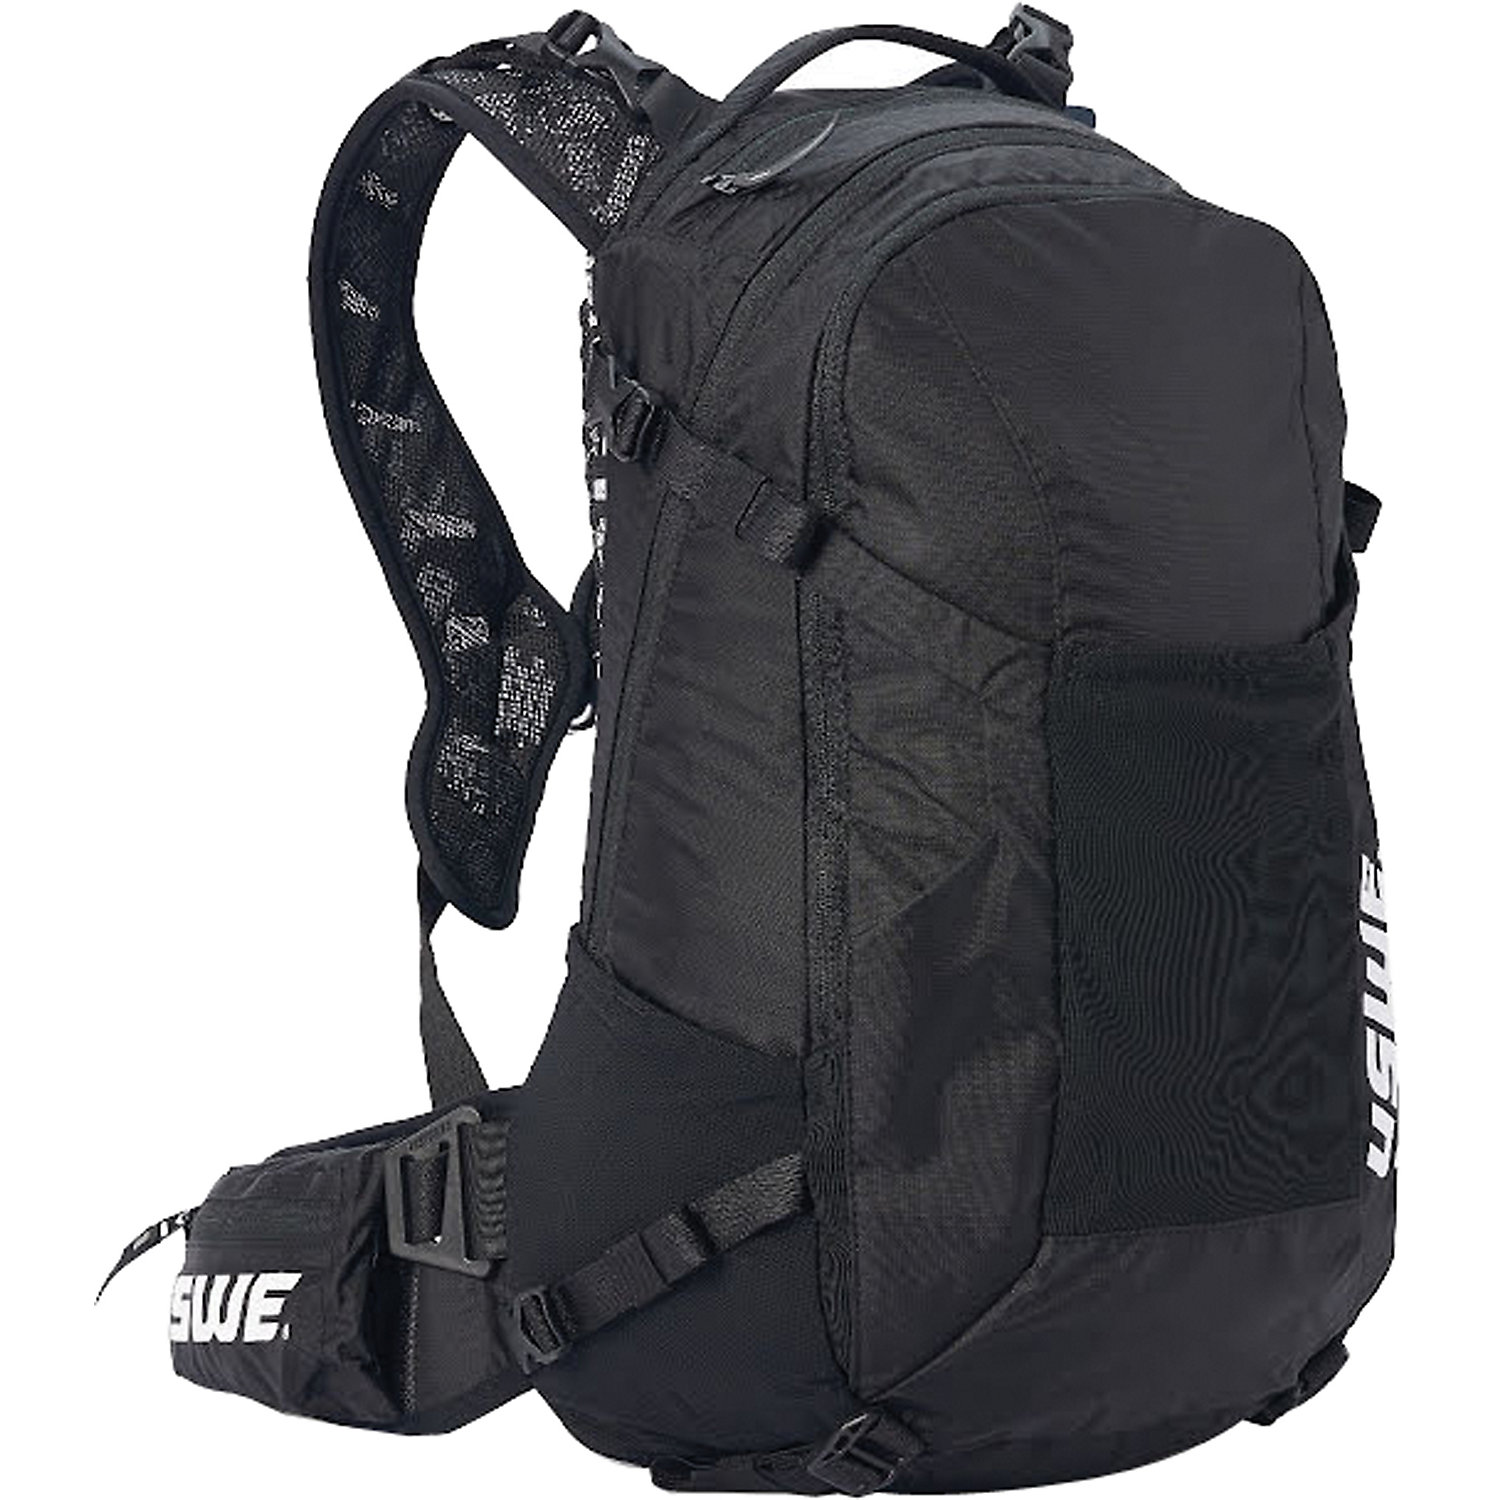 USWE Shred 25 Day Pack